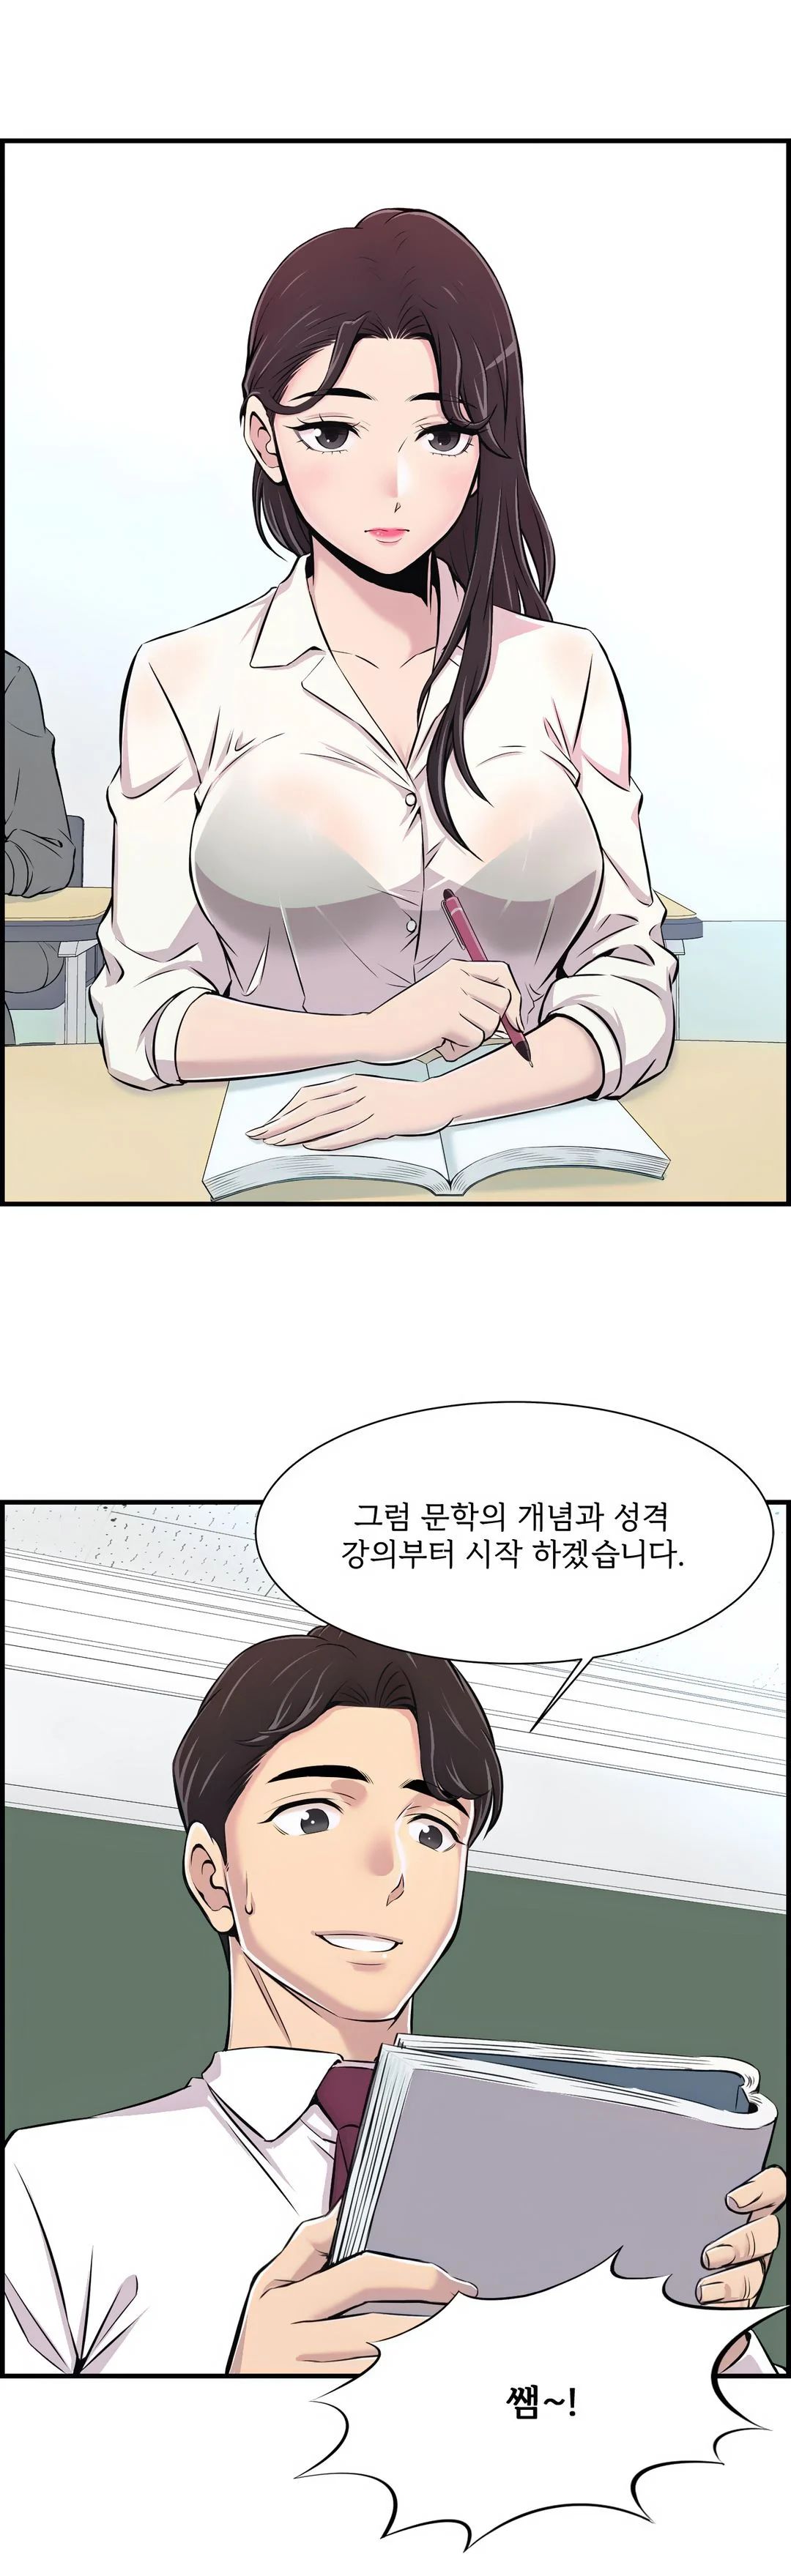 Cram School Scandal Raw - Chapter 1 Page 31